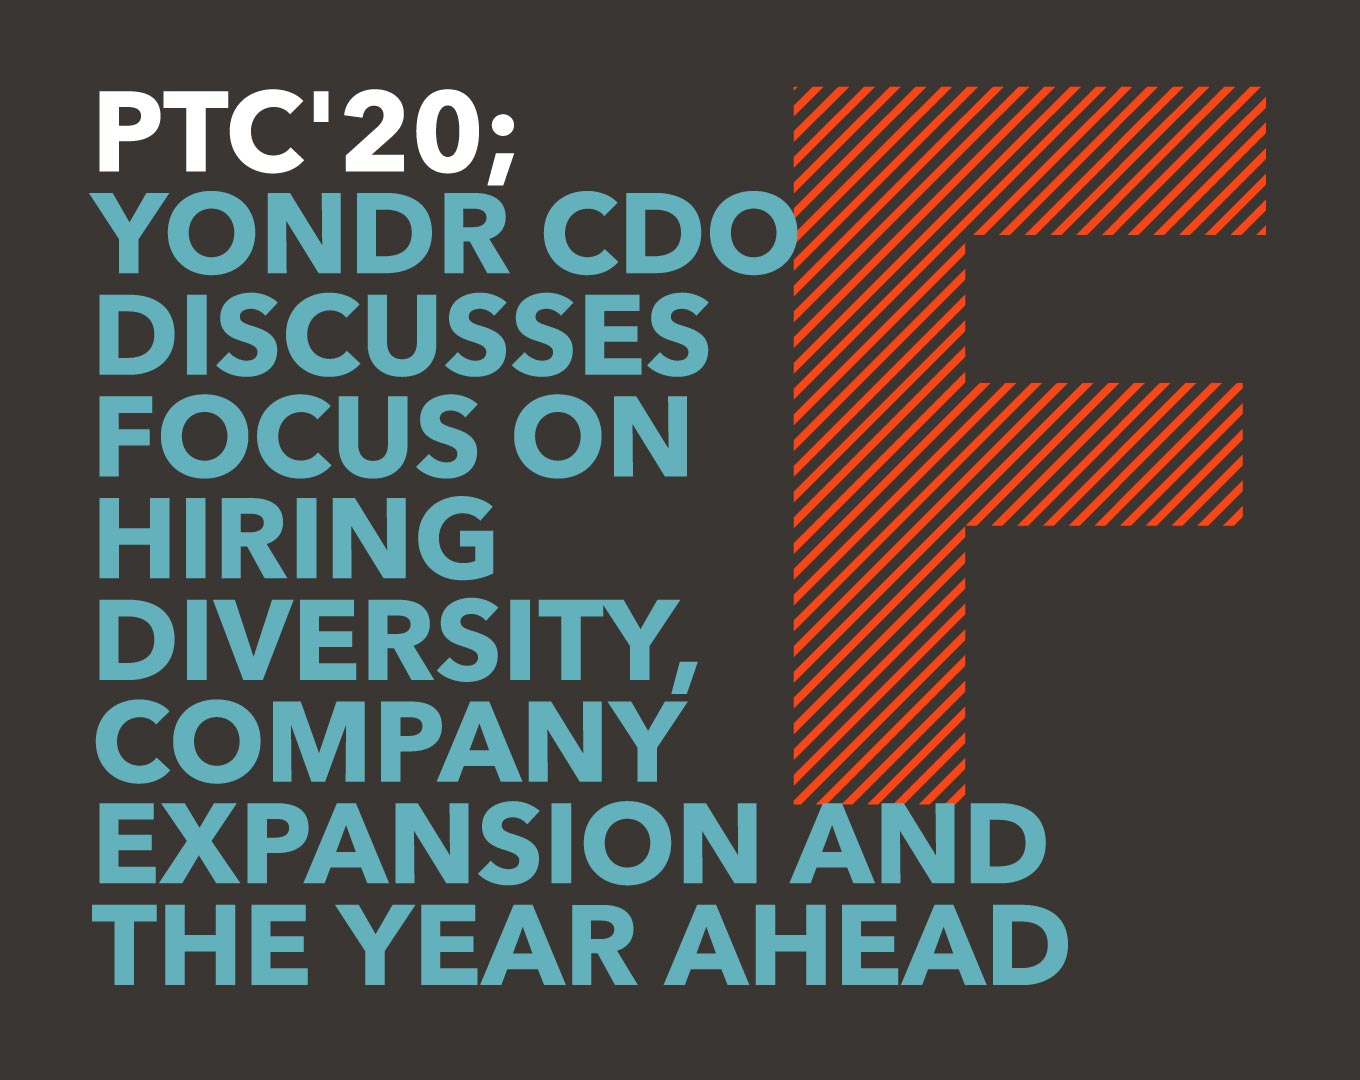 PTC'20; Hiring diversity, company expansion and the year ahead